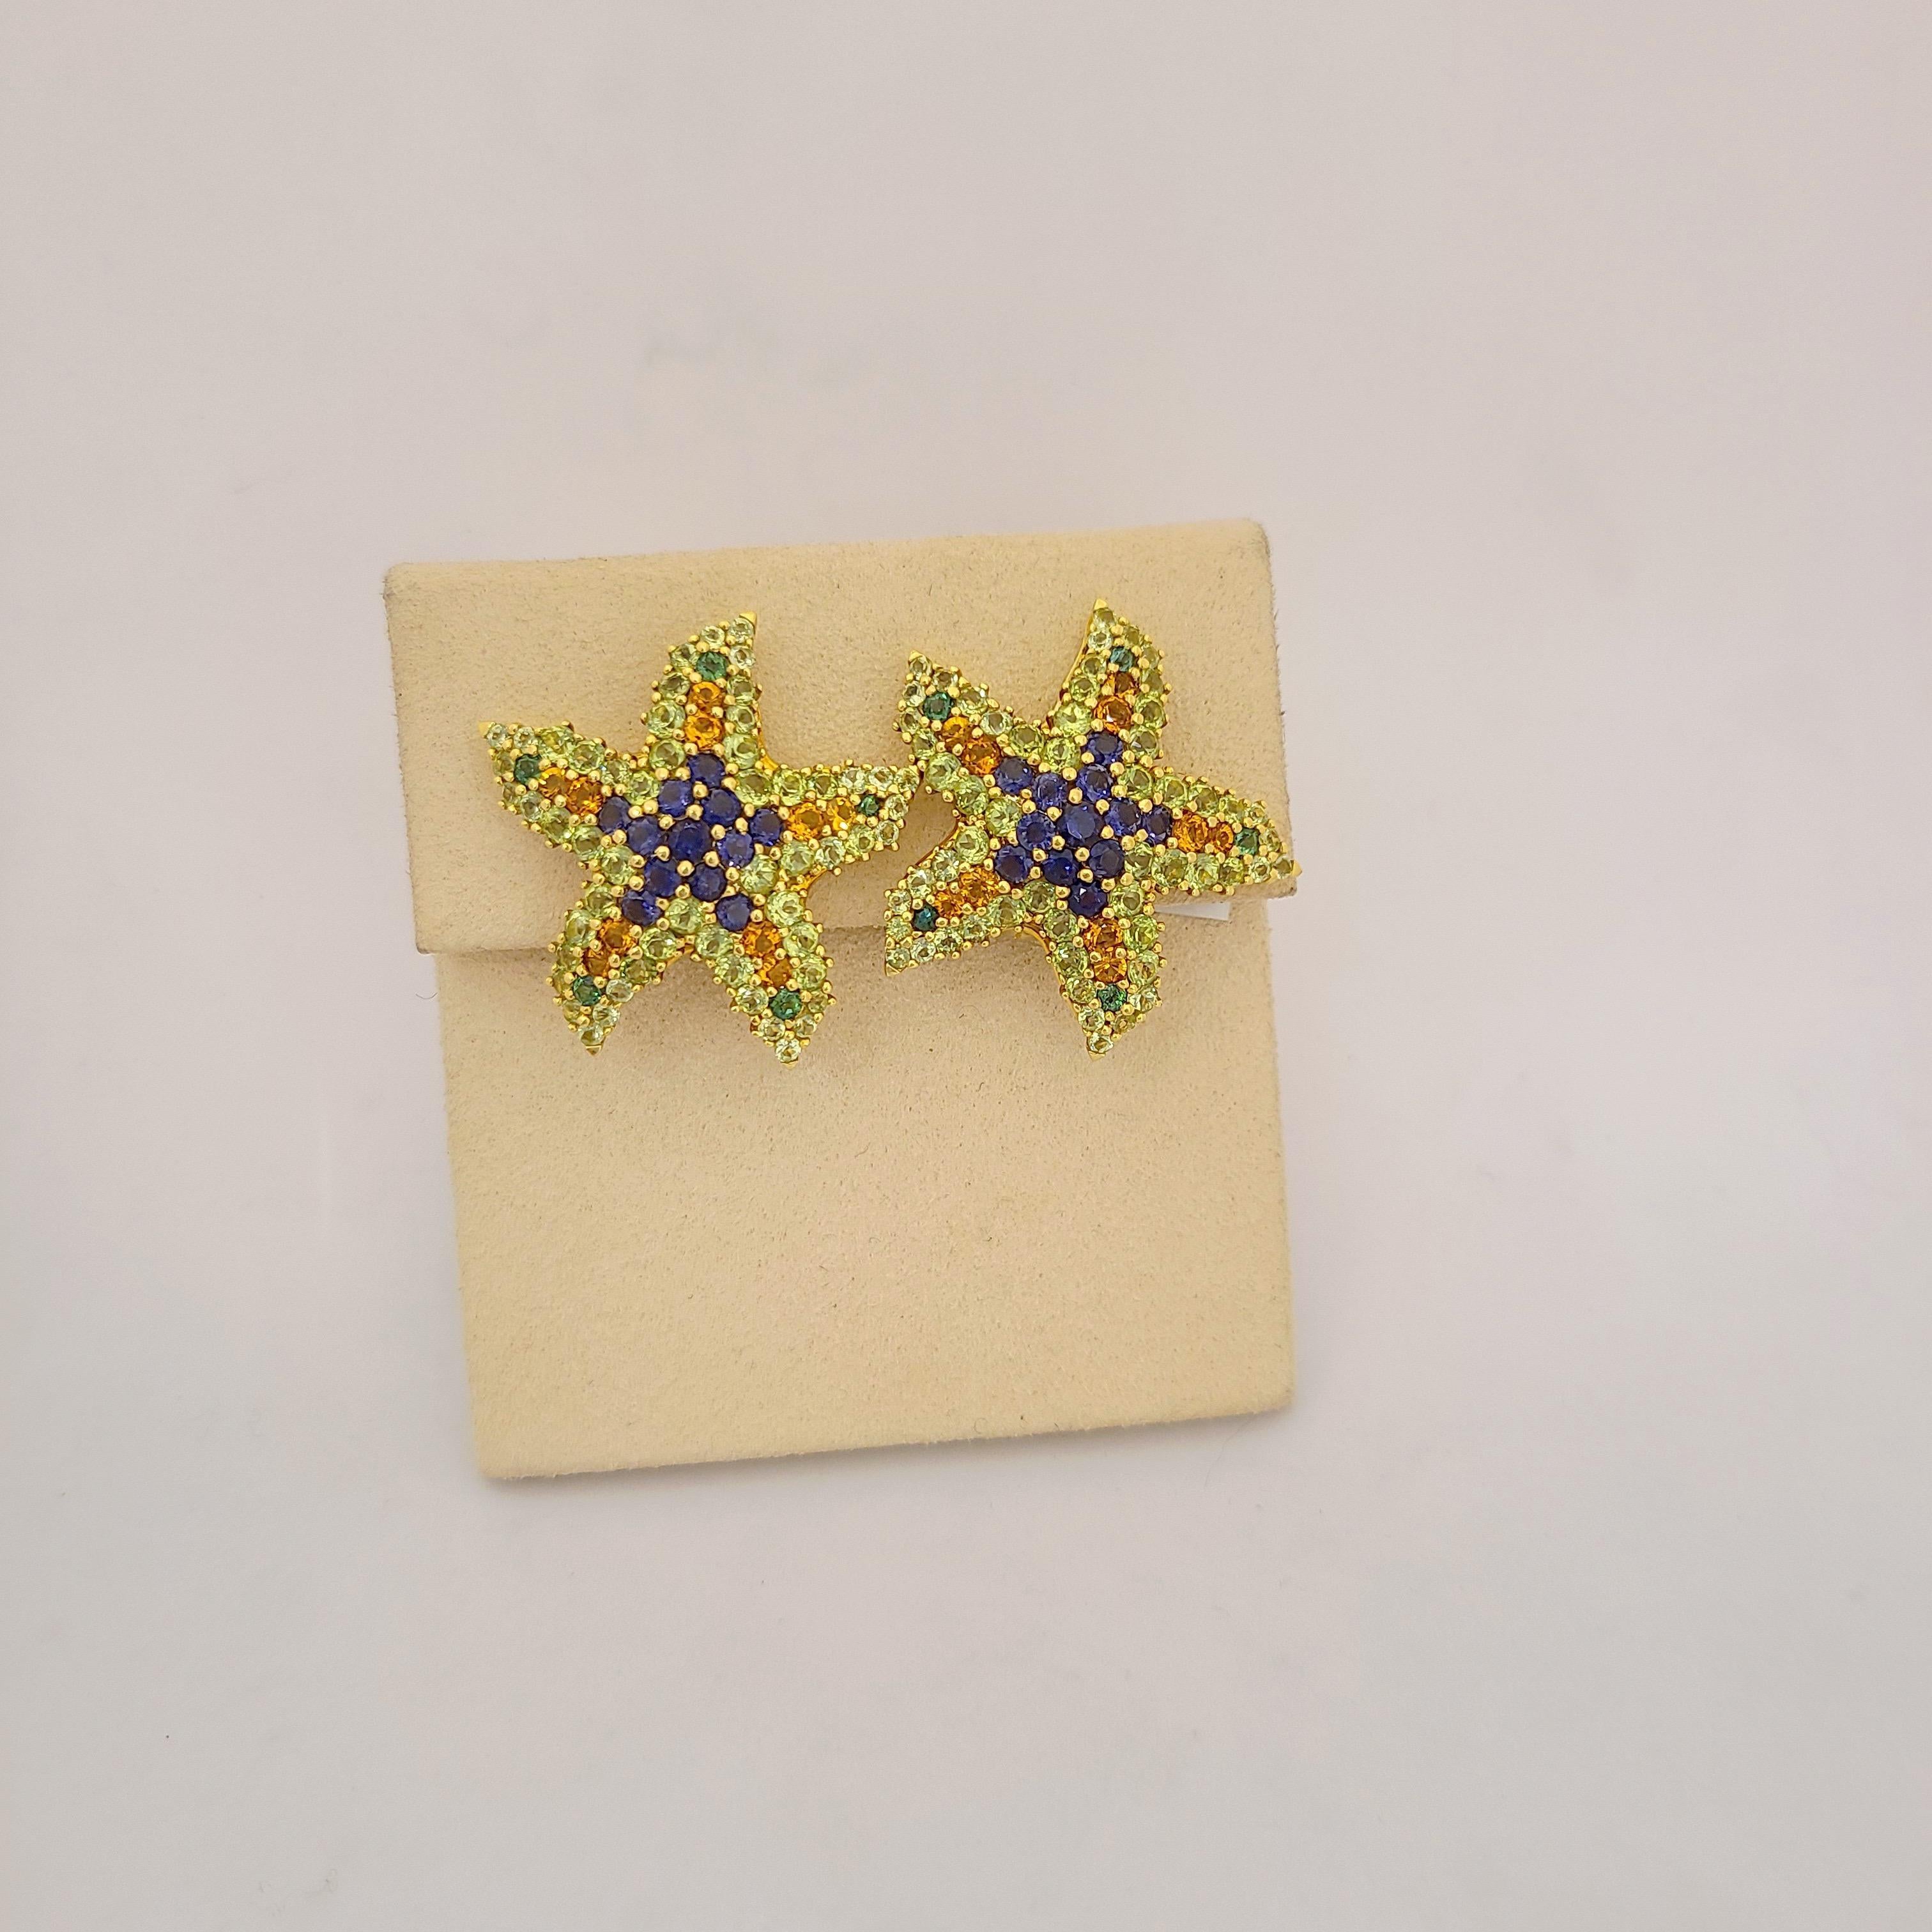 Amazing starfish earrings, set in 18 Karat Yellow Gold. The starfish symbolizes divine love, brilliance, and intuition.
These earrings are set with semi precious round stones of peridot, citrine and iolite - Total Semi Precious weight 3.21Ct.